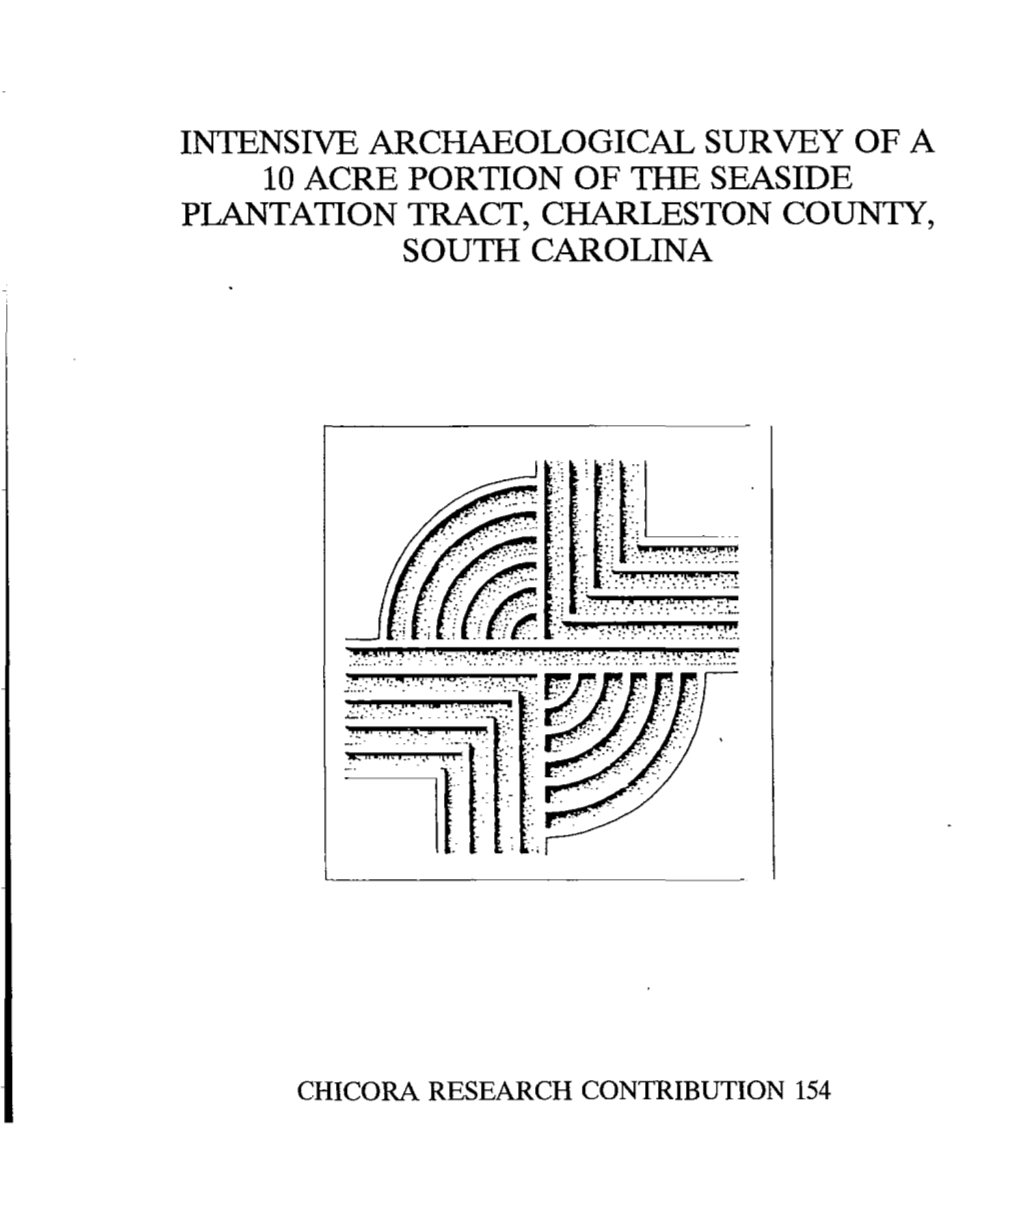 Intensive Archaeological Survey of a 10 Acre Portion of the Seaside Plantation Tract, Charleston County, South Carolina